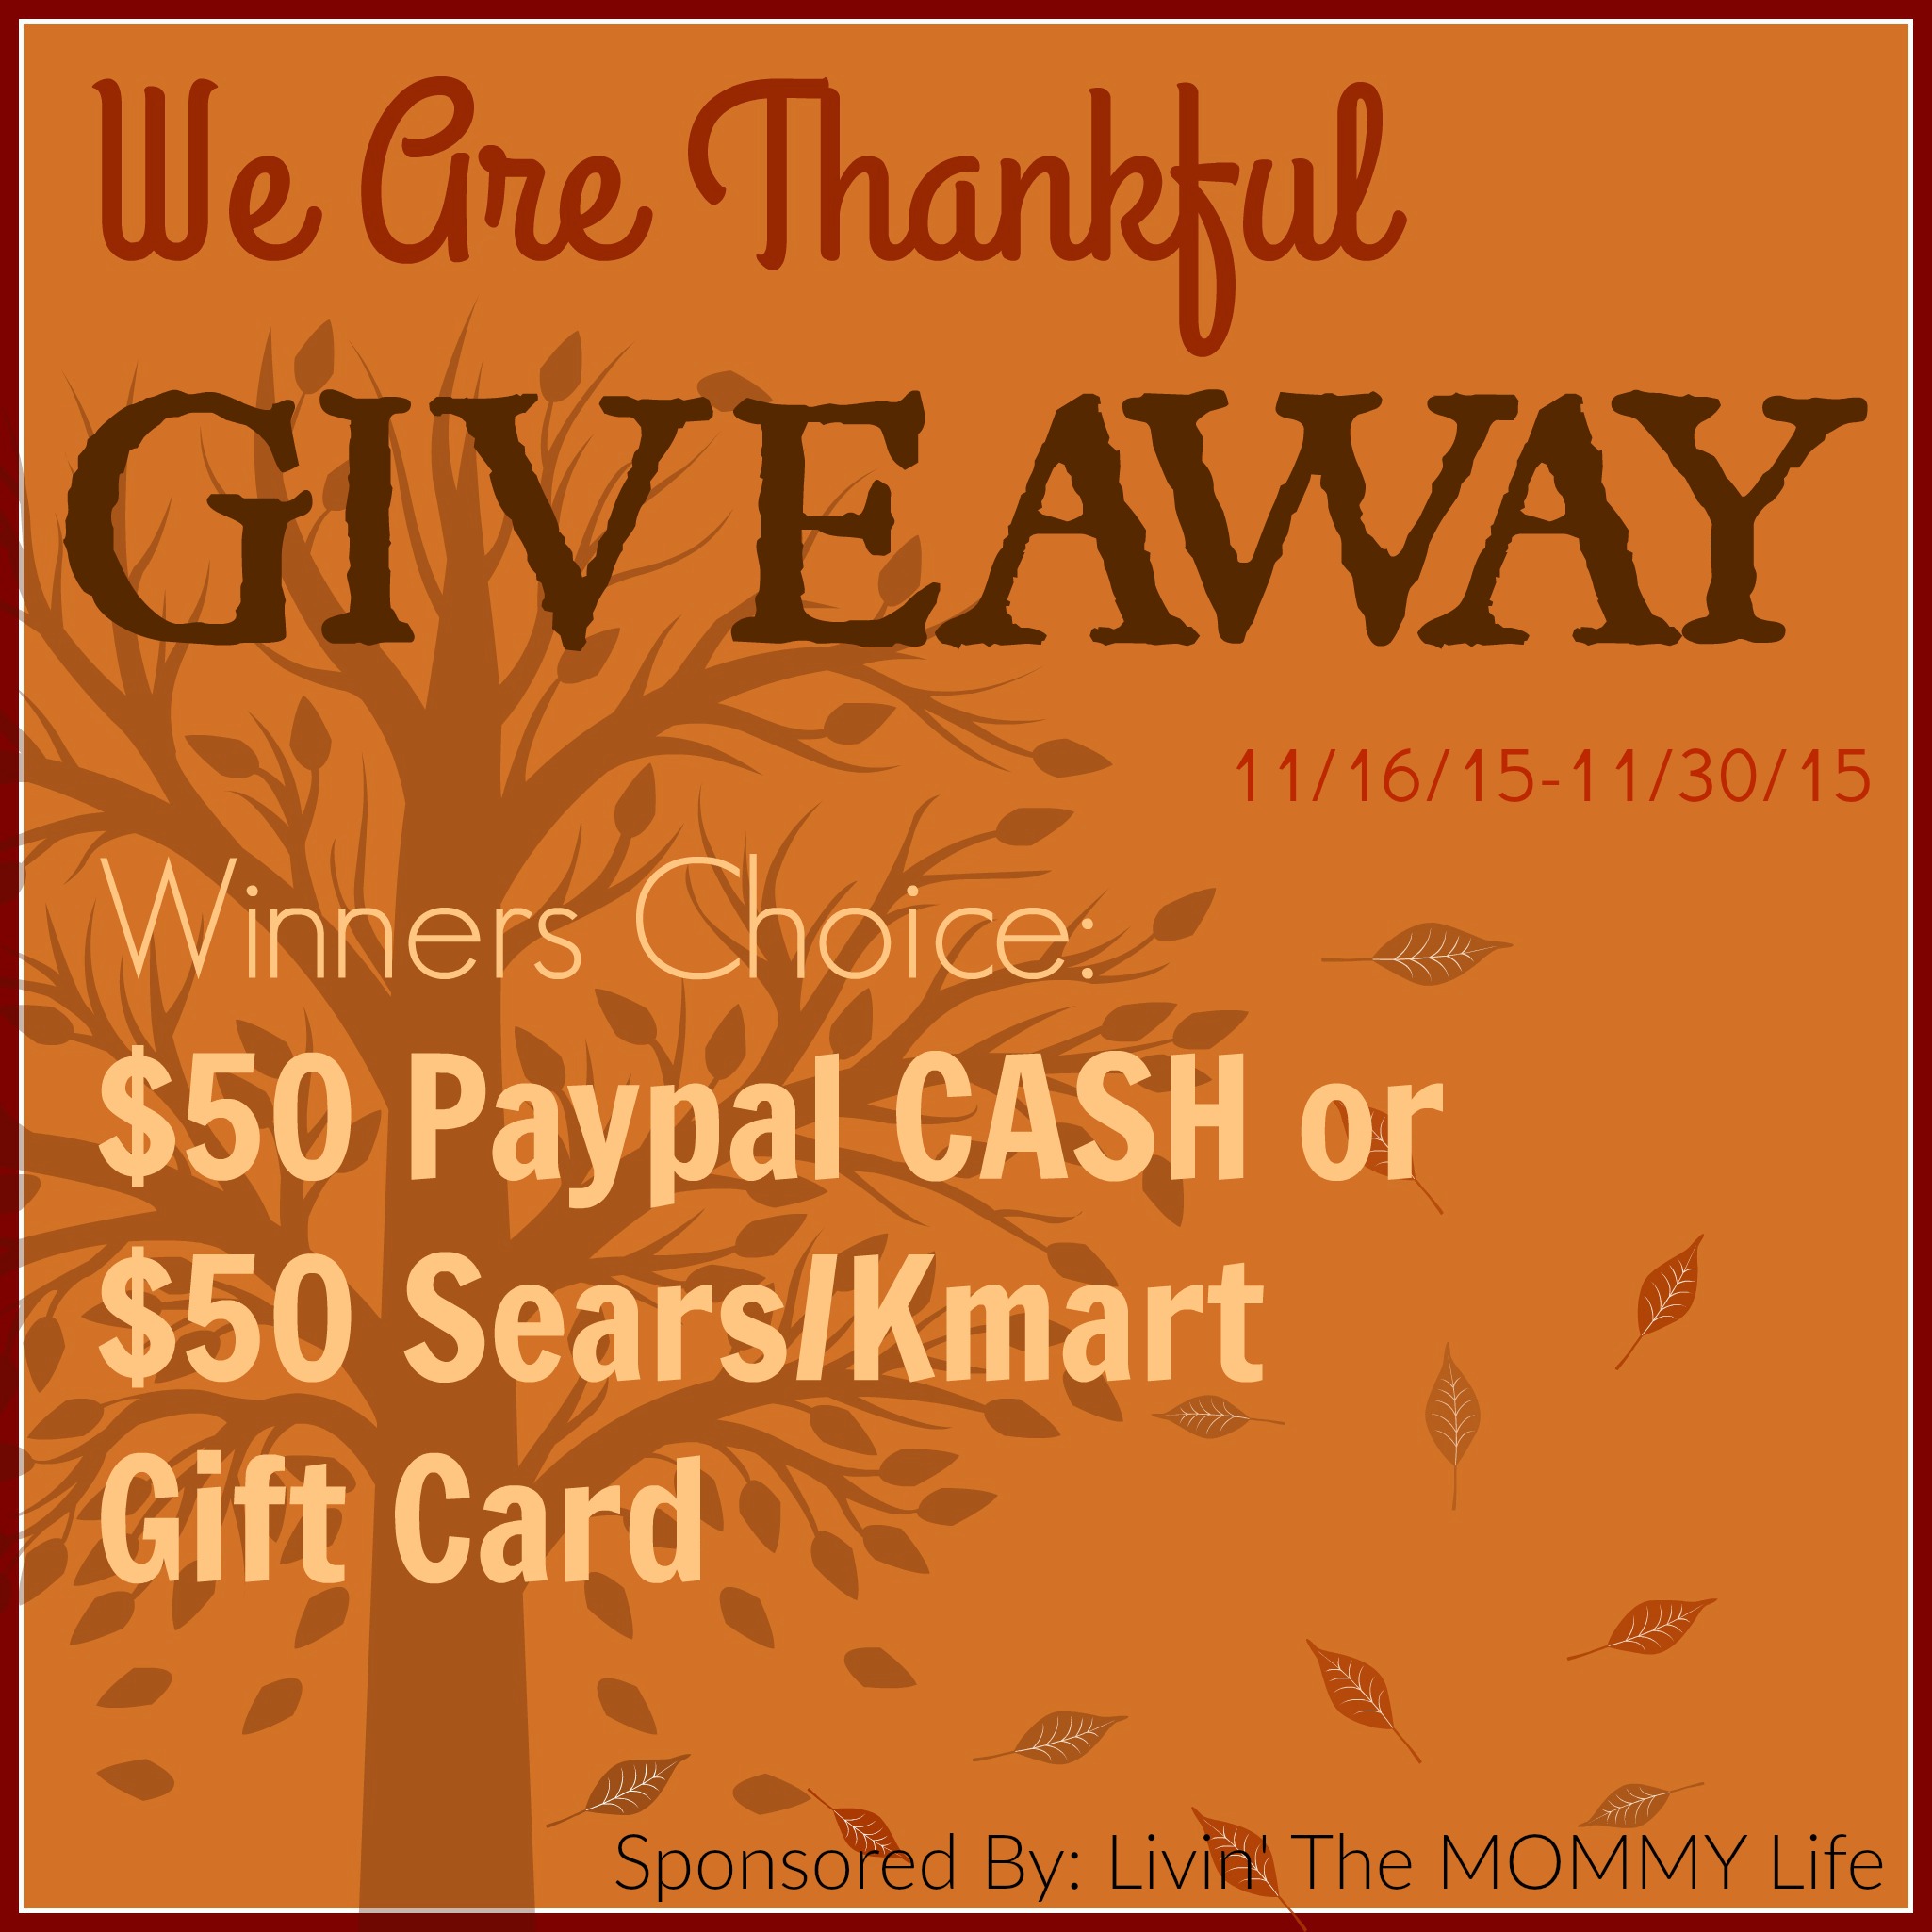 We Are Thankful Paypal Casg Kmart Gift card Giveaway